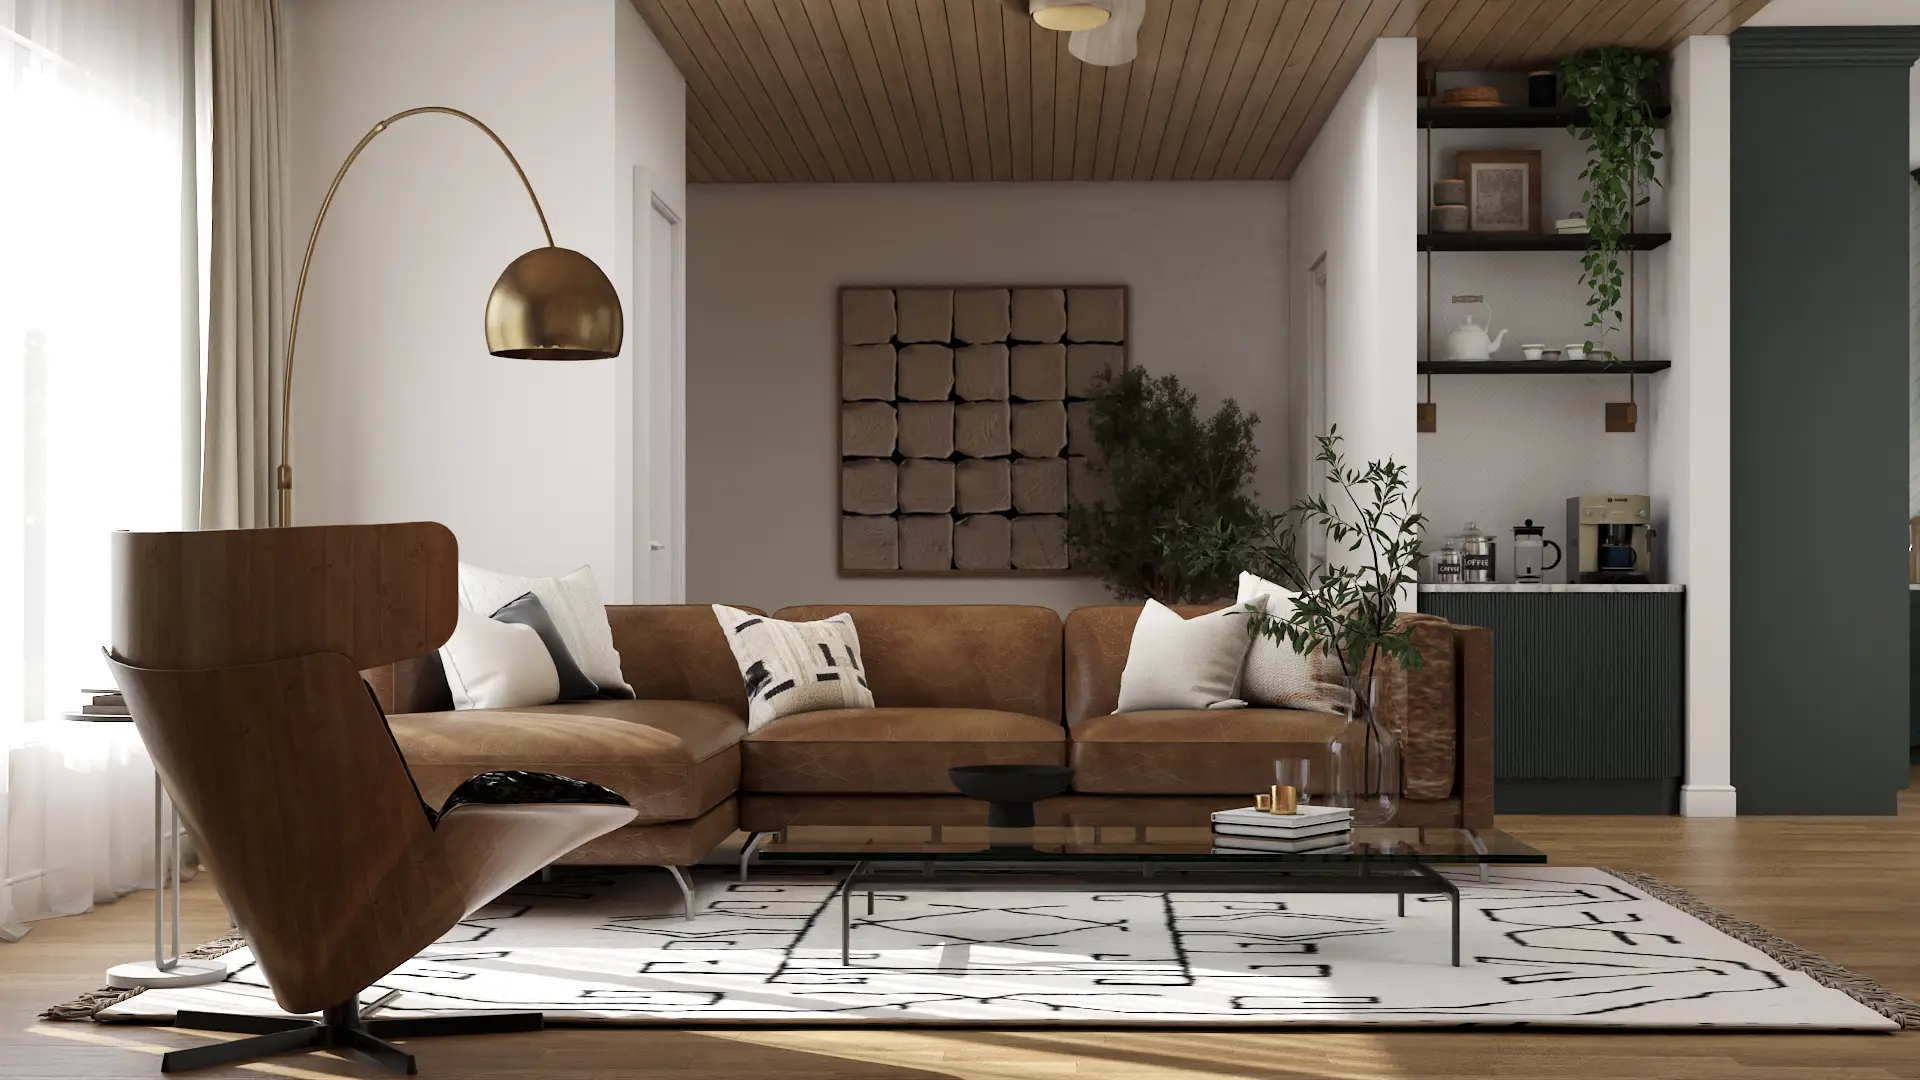 Chic living room with modern leather furniture, stylish decor, and a homely atmosphere, perfectly blending sophistication with comfort. Design by Debora, an online interior design service.